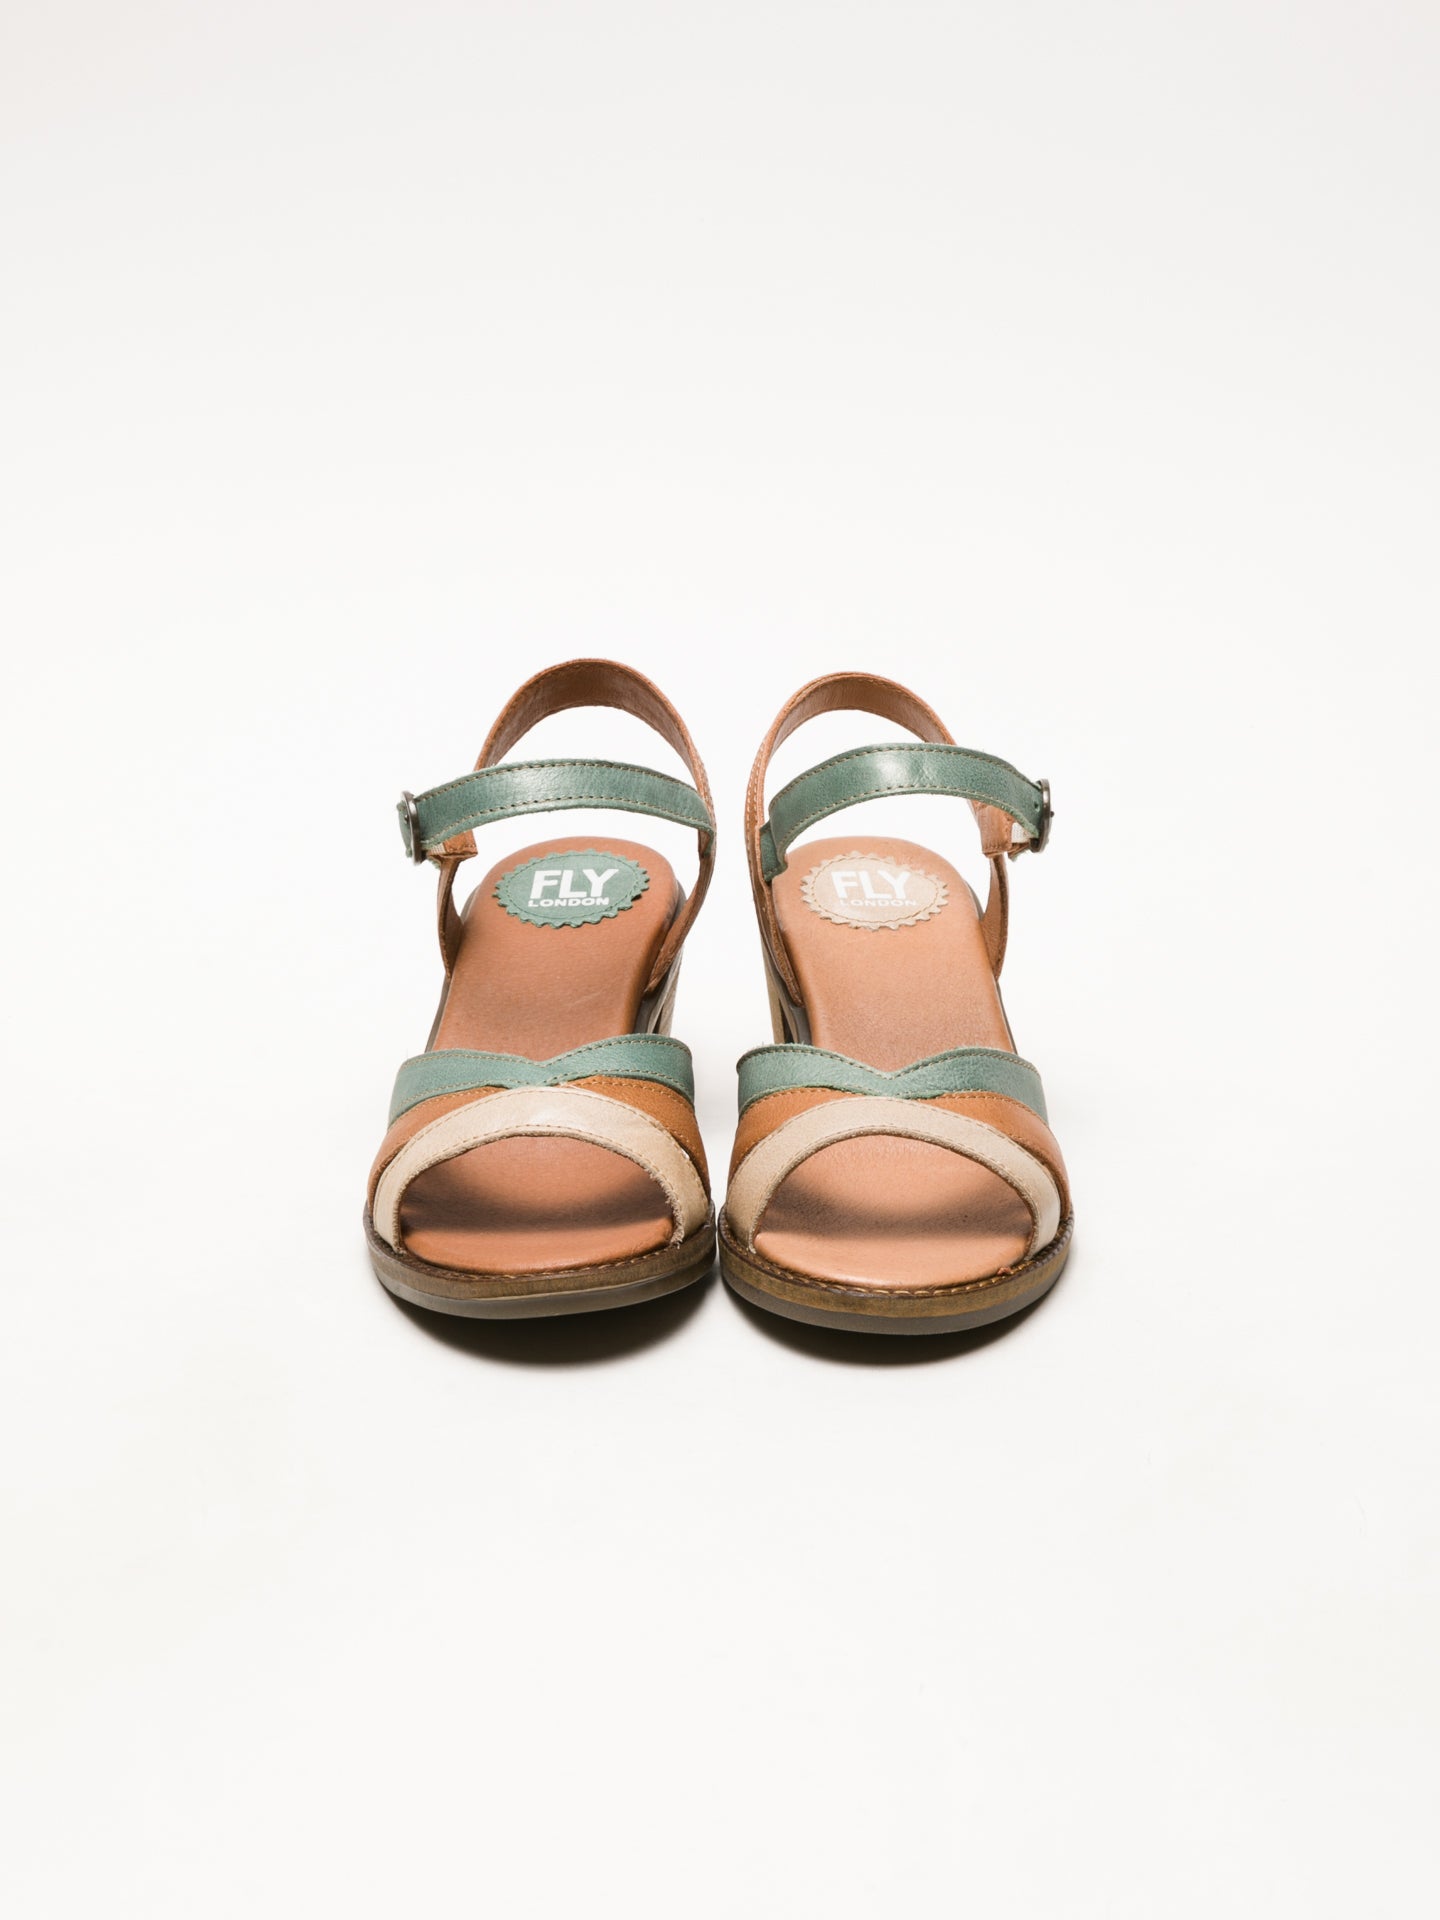 Fly London Multicolor Buckle Sandals